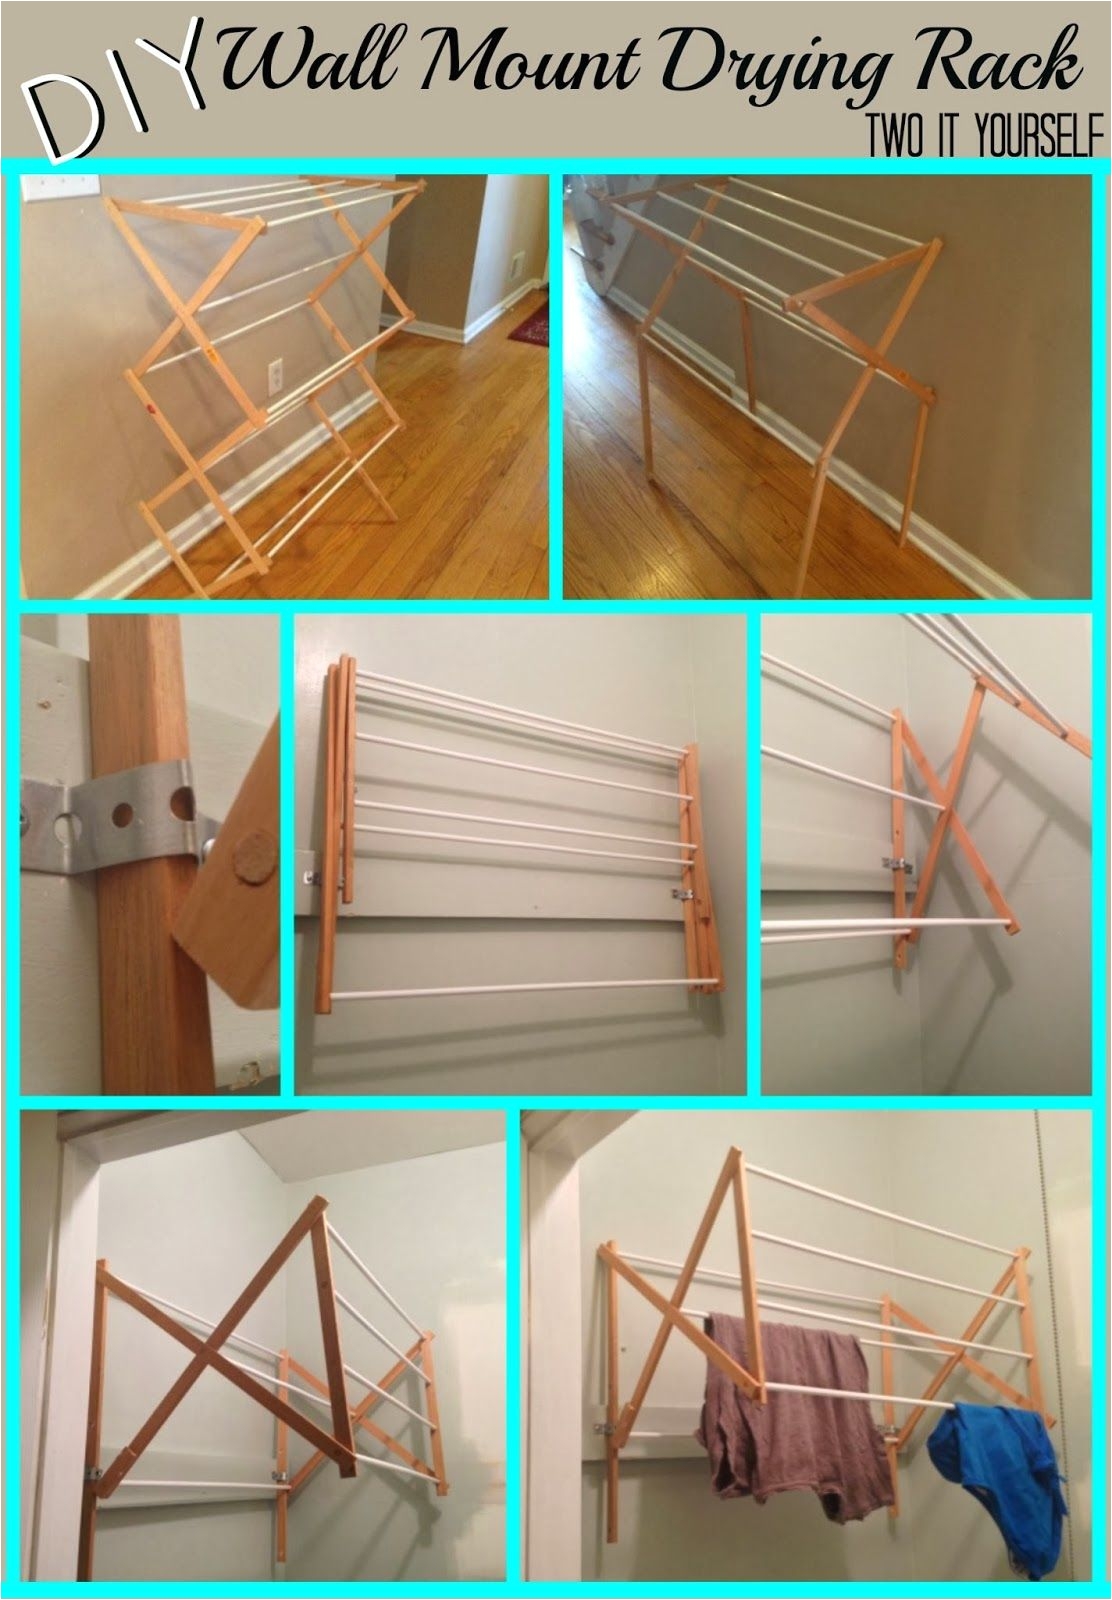 two it yourself diy laundry drying rack wall mount from floor standing